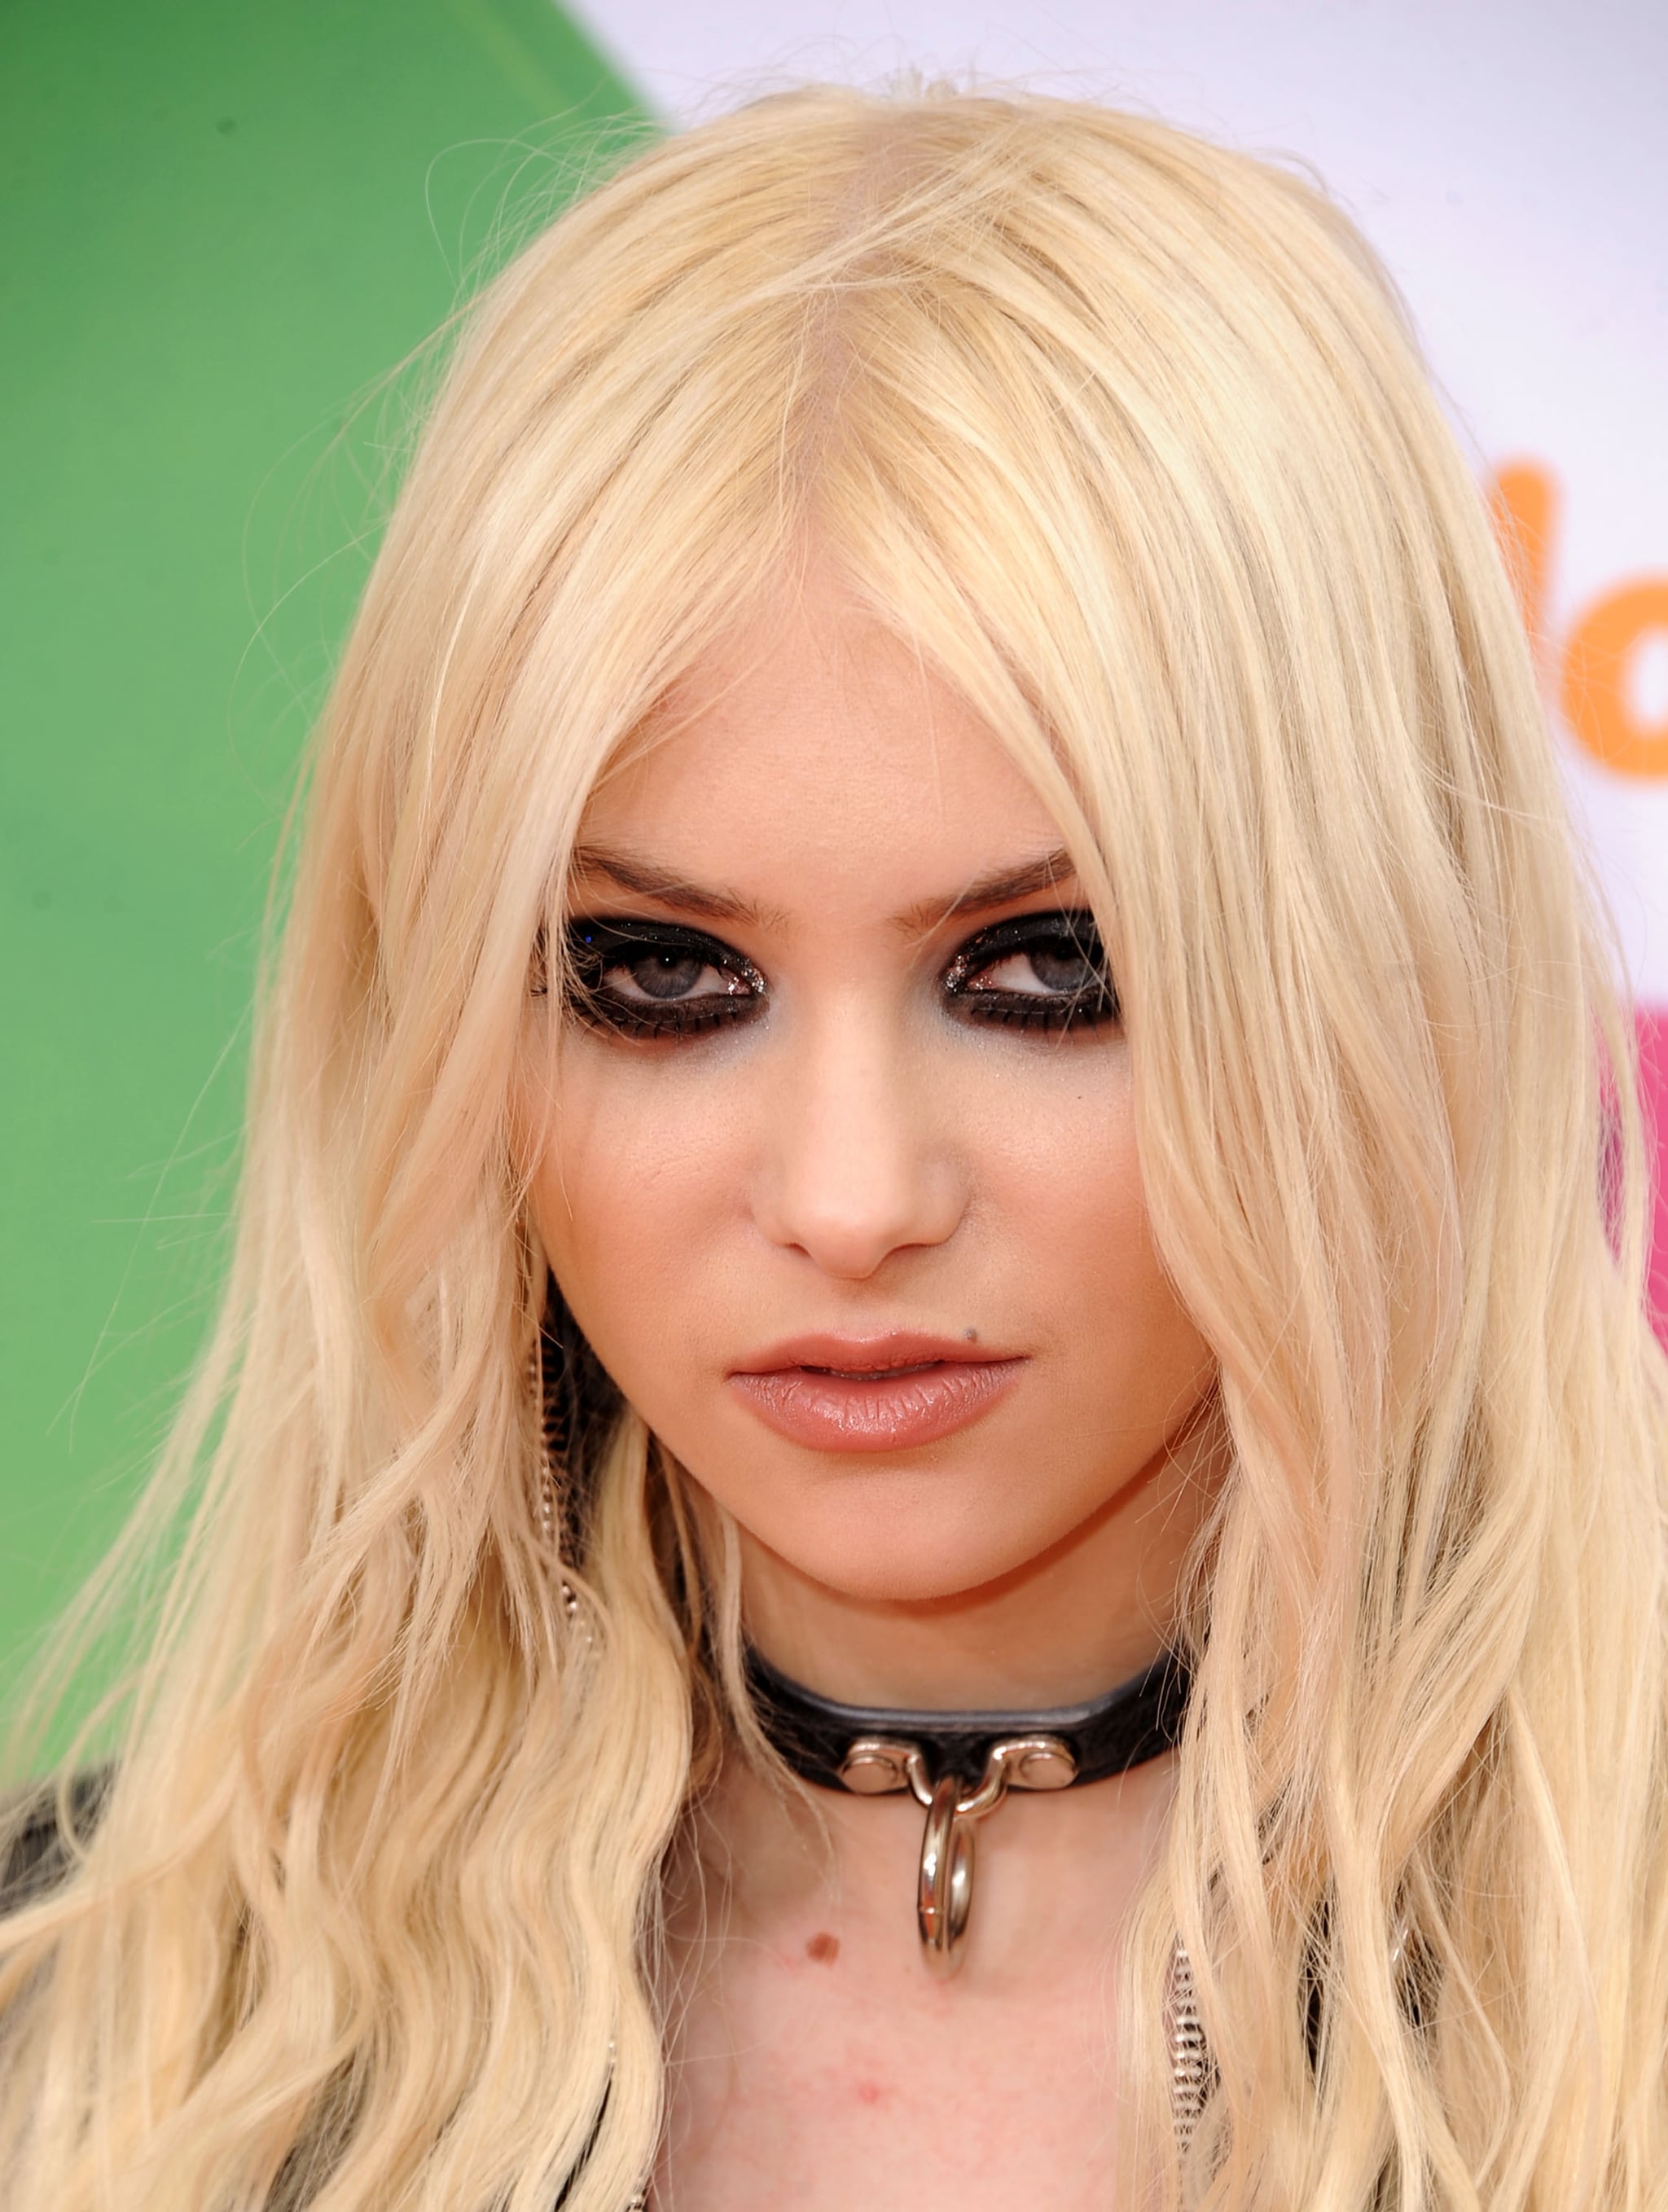 Actress/musician Taylor Momsen arrives at Nickelodeon's 24th Annual Kids' Choice Awards at Galen Centre on April 2, 2011 in Los Angeles, California.